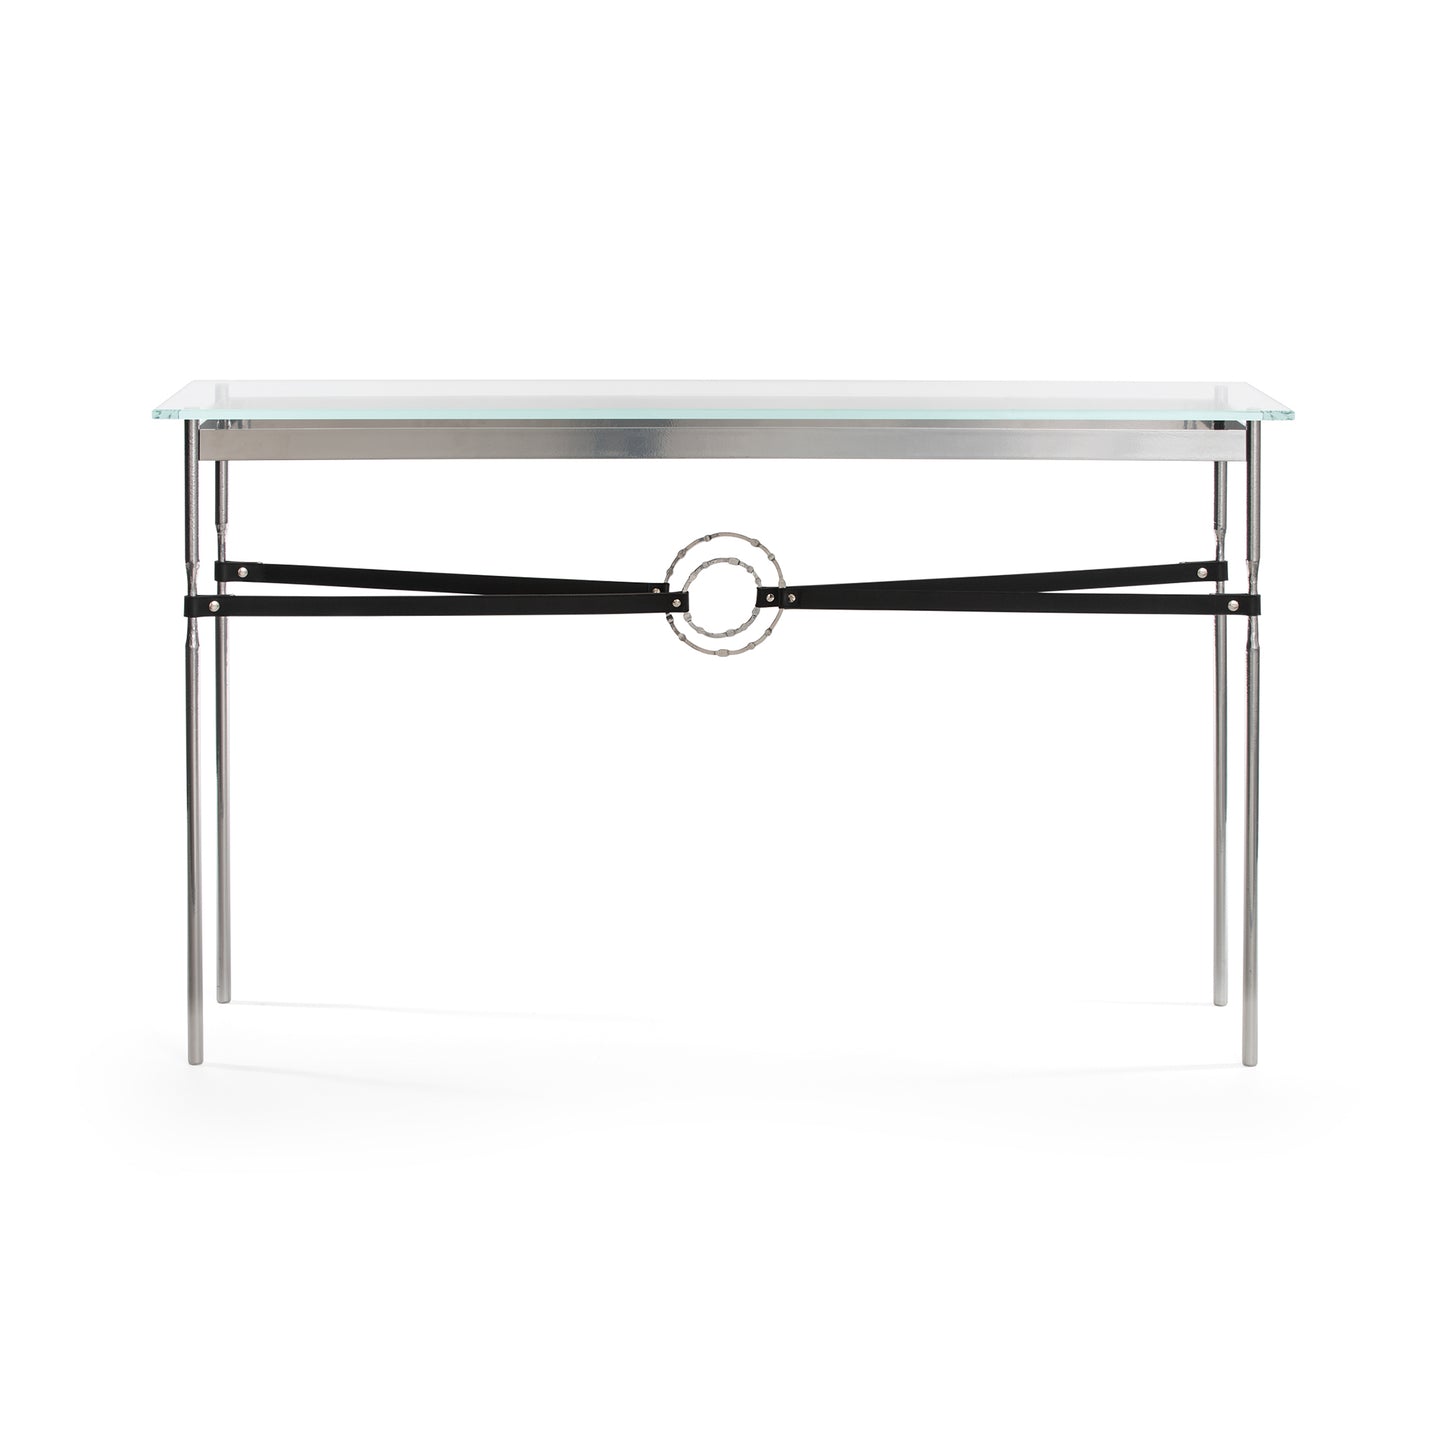 An Equus Console Table by Hubbardton Forge with a metal frame, tempered glass top.